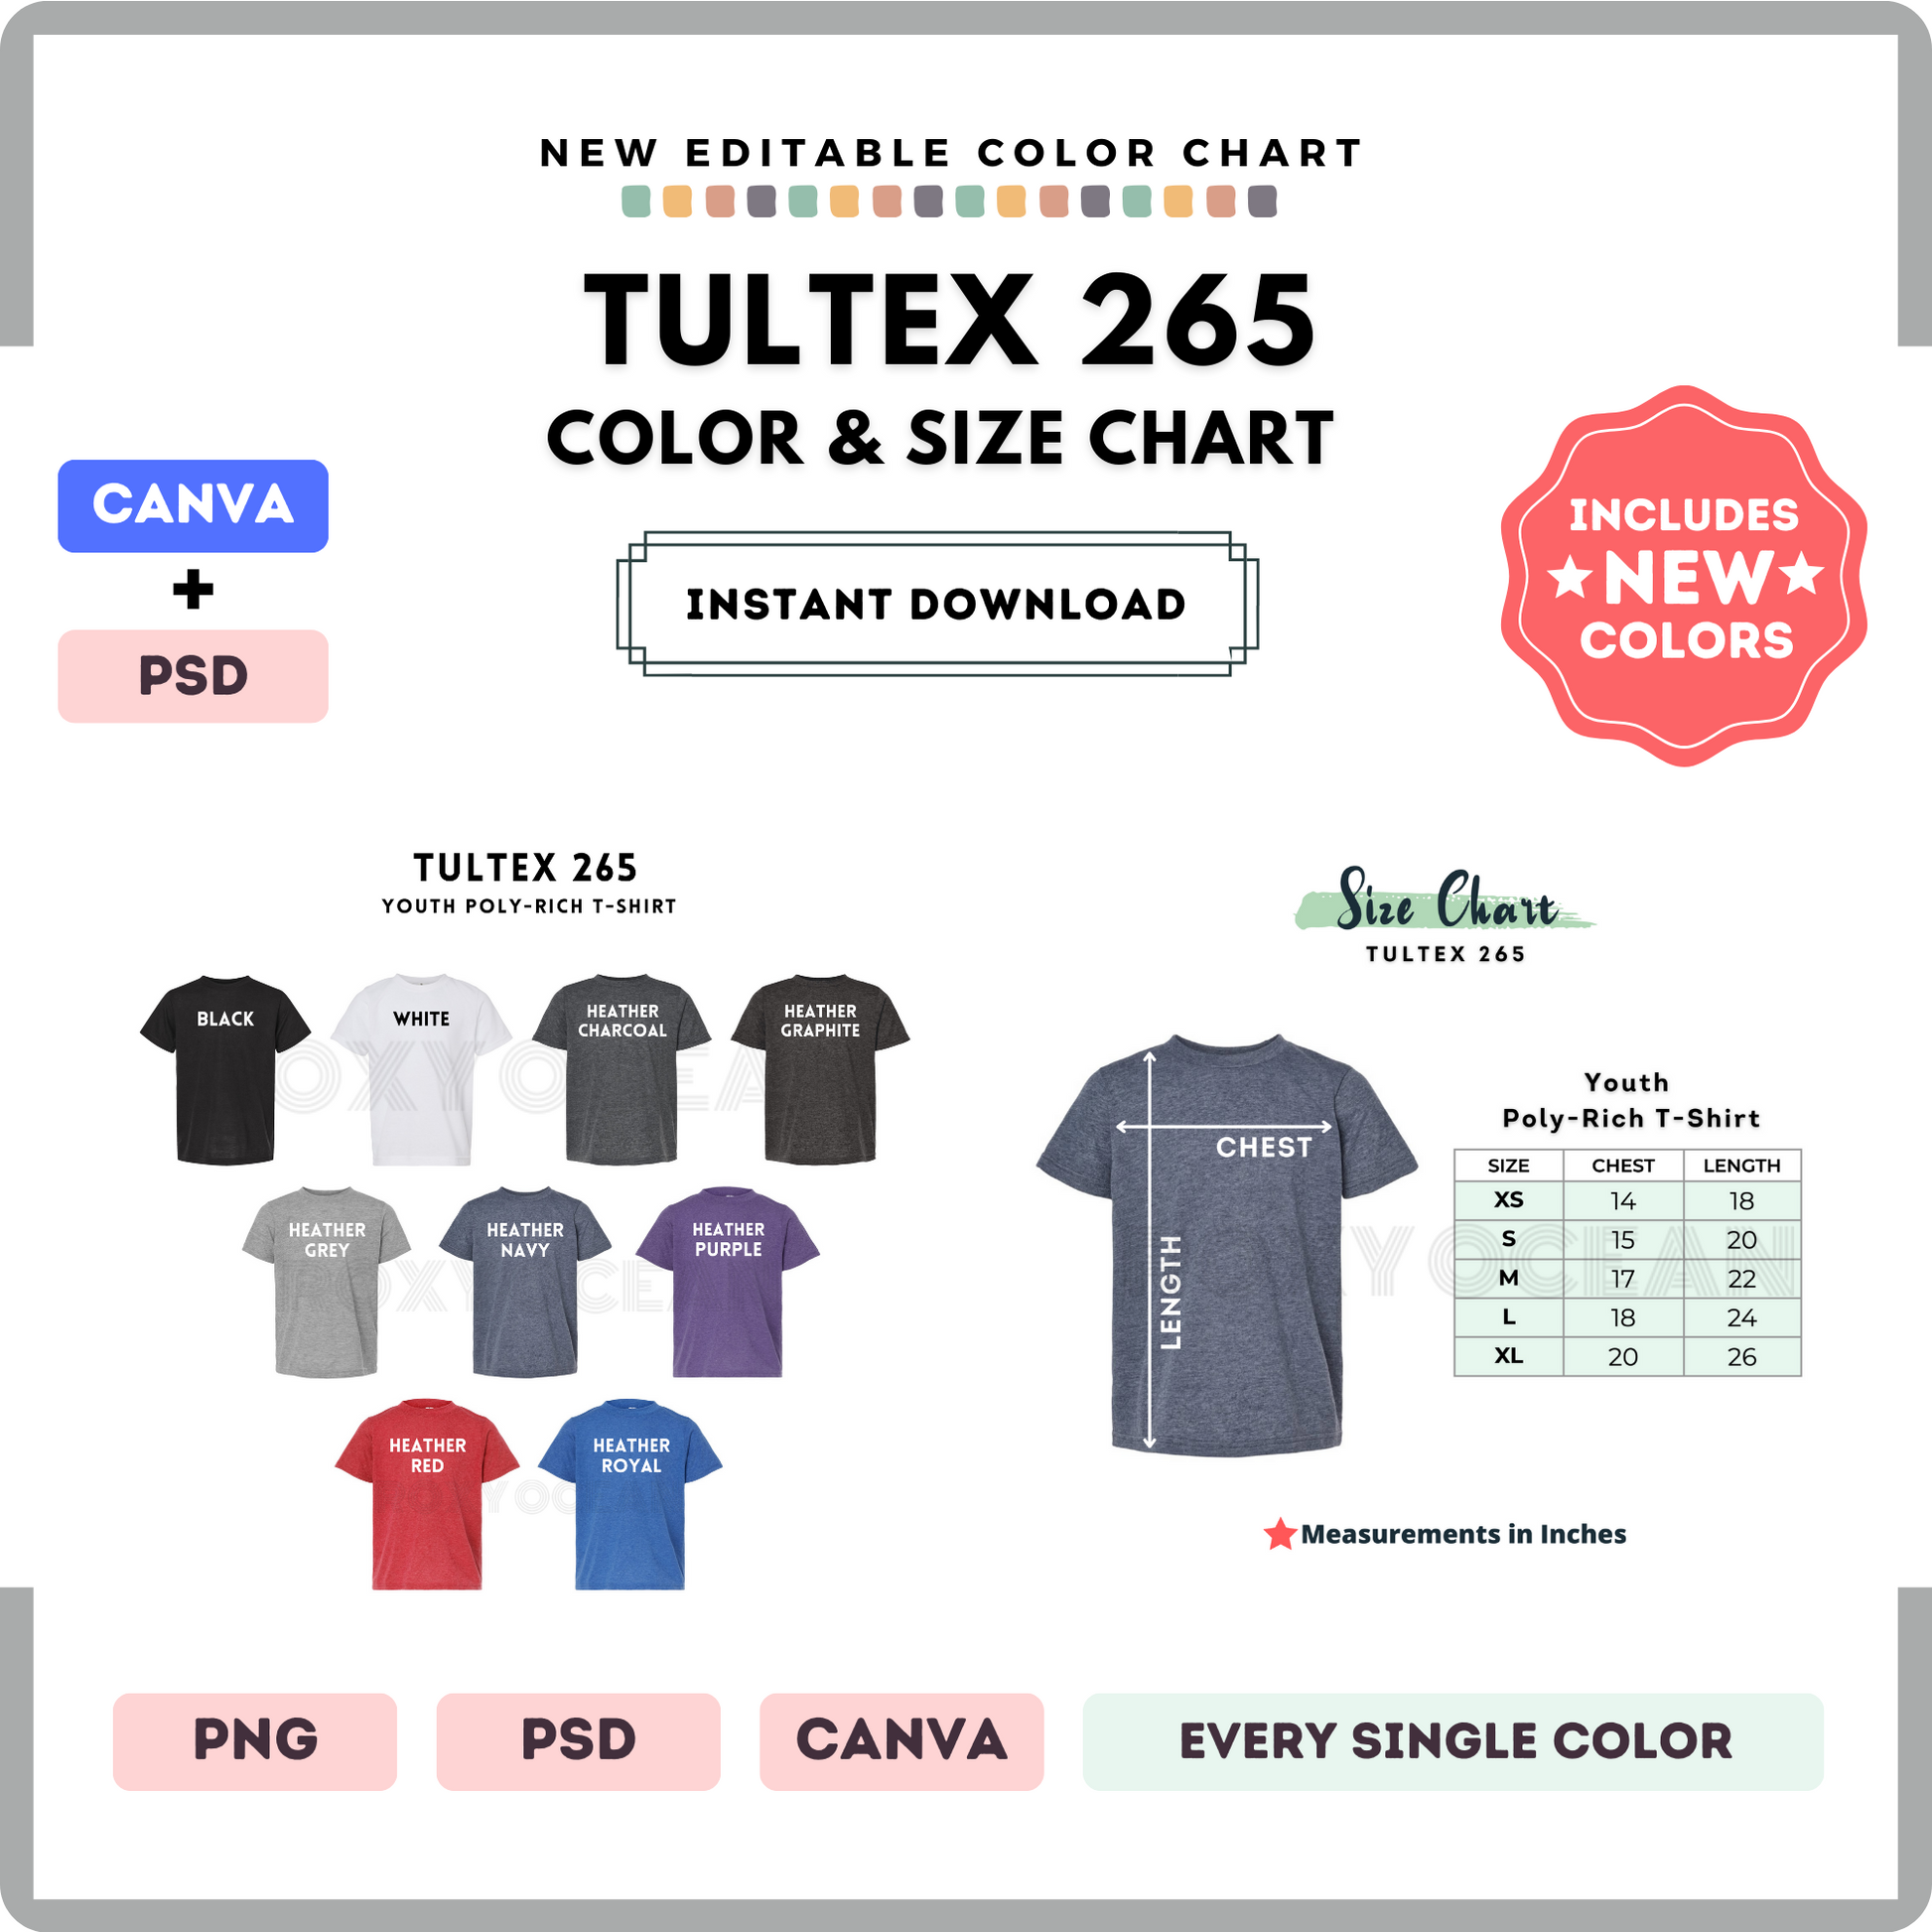 Tultex 265 Color and Size Chart